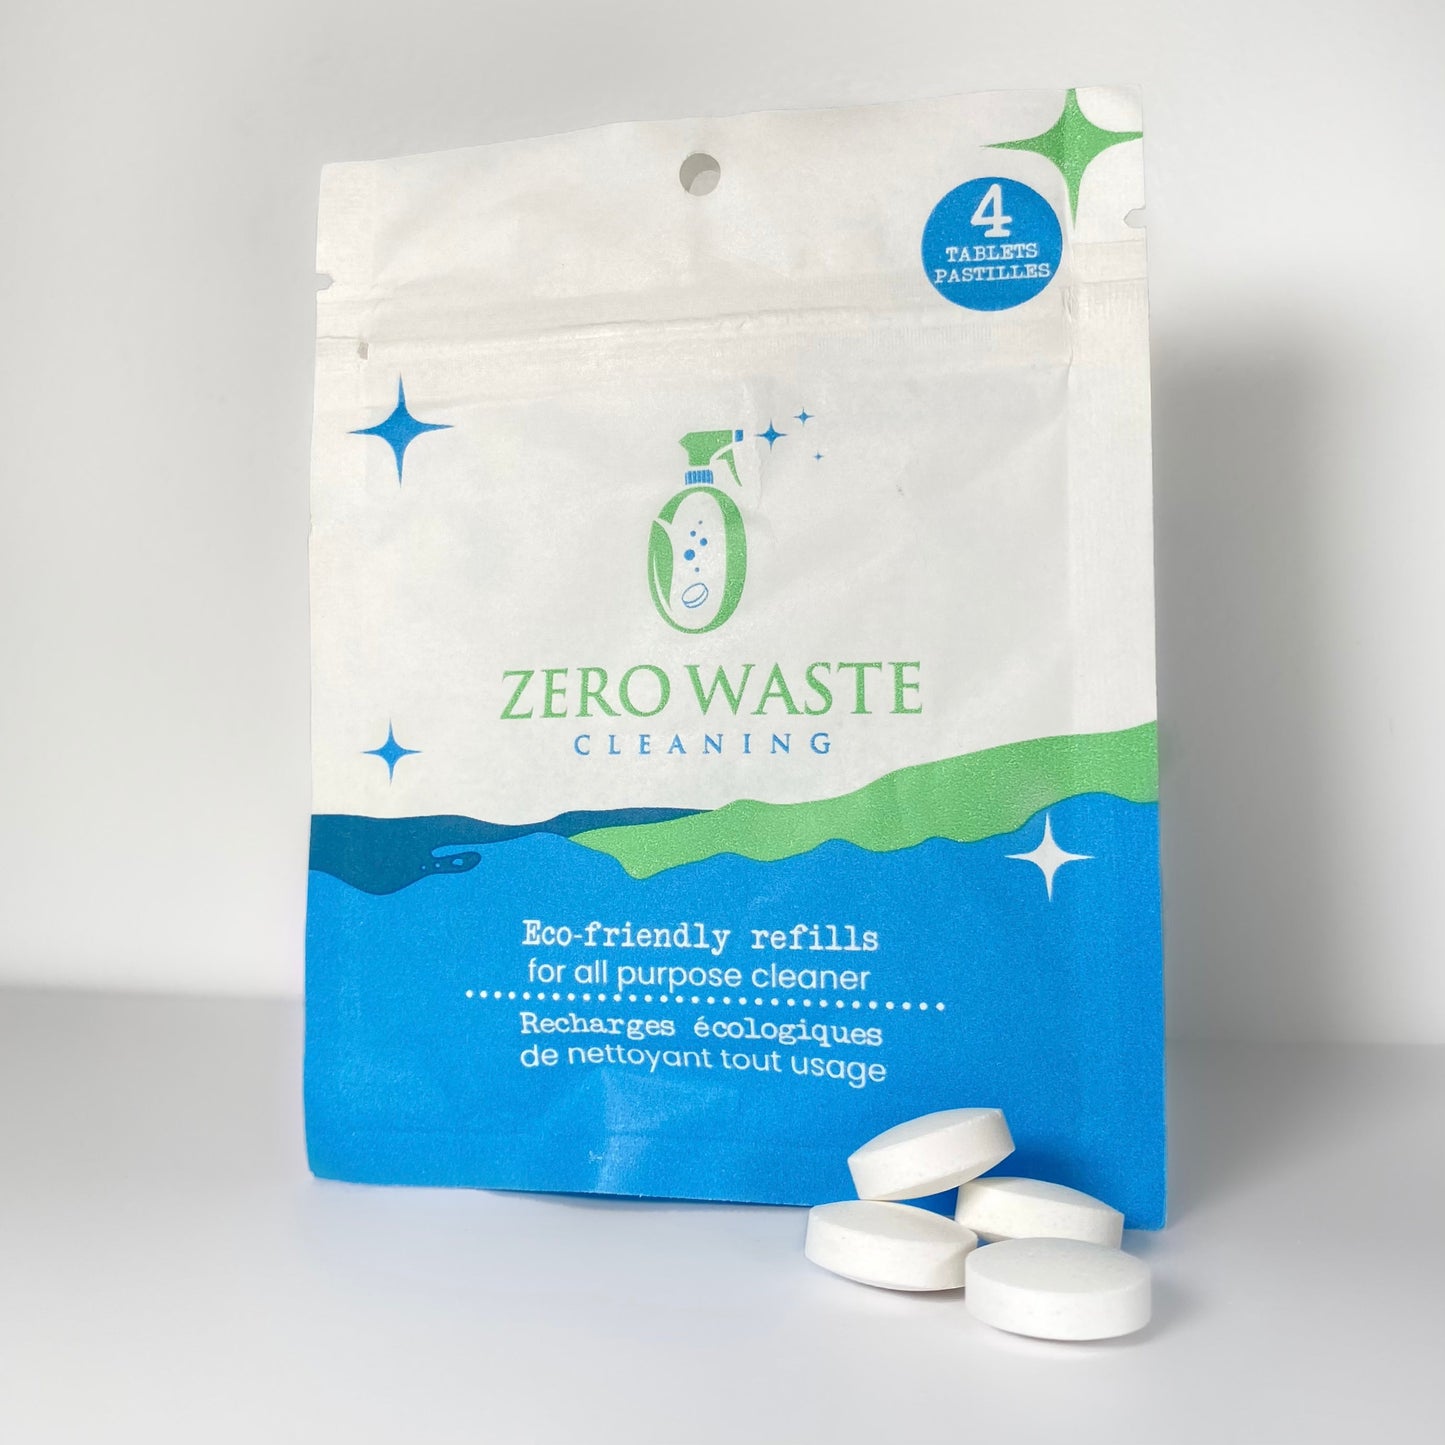 0wastecleaning All purpose cleaner refill - pack of 4 zero waste-sustainable-refill tablet  magasin zero dechet a Montreal vegan cleaner-pet friendly cleaner